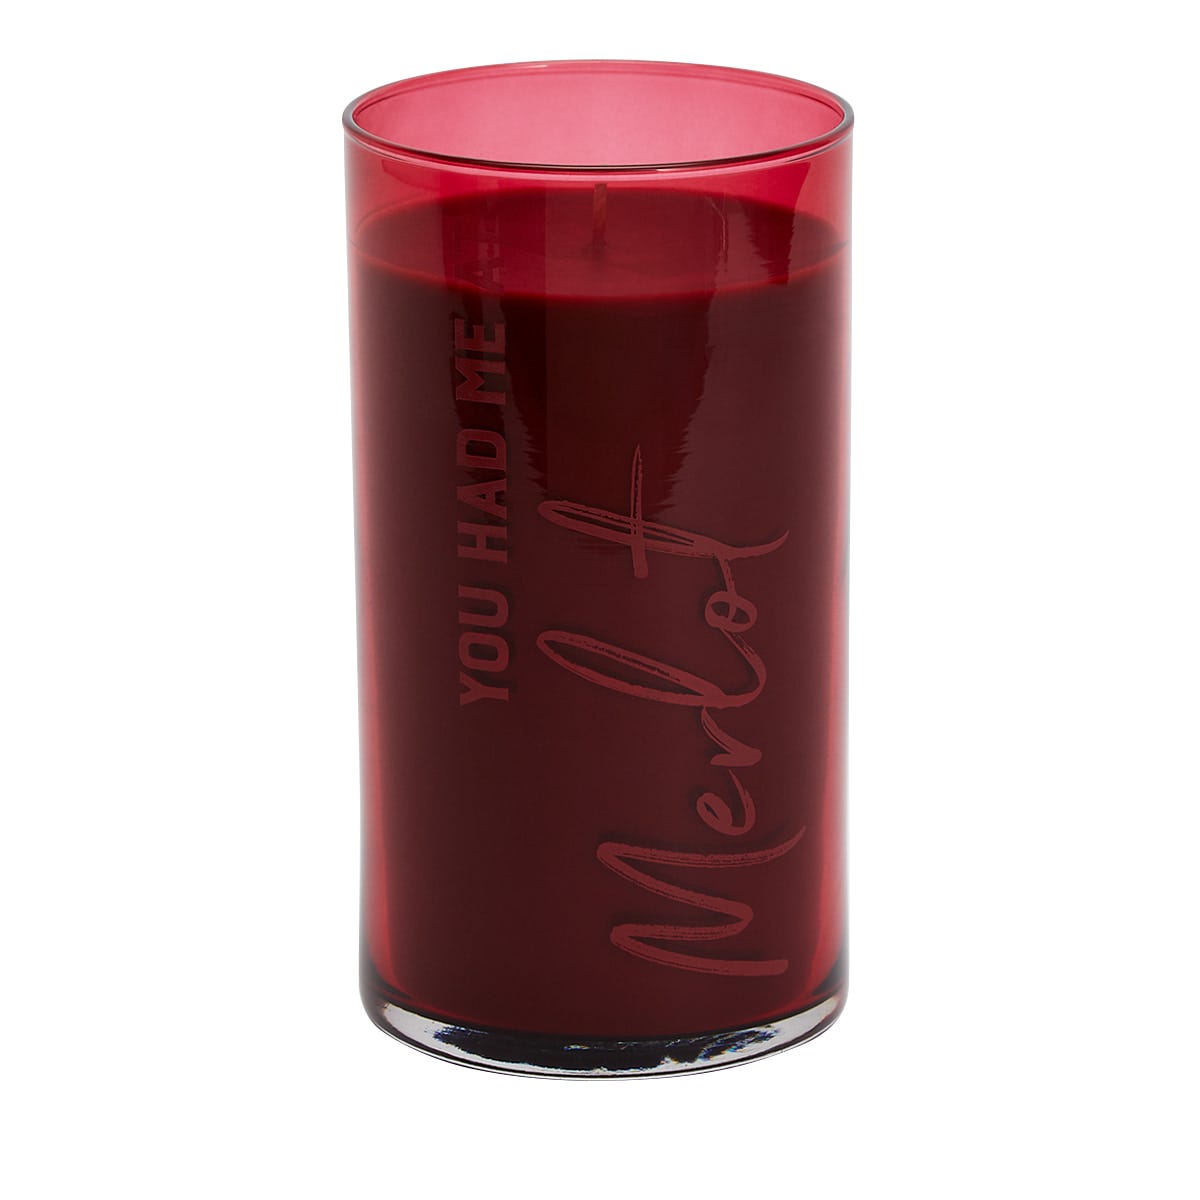 You Had Me at Merlot Jar Candle - PartyLite US